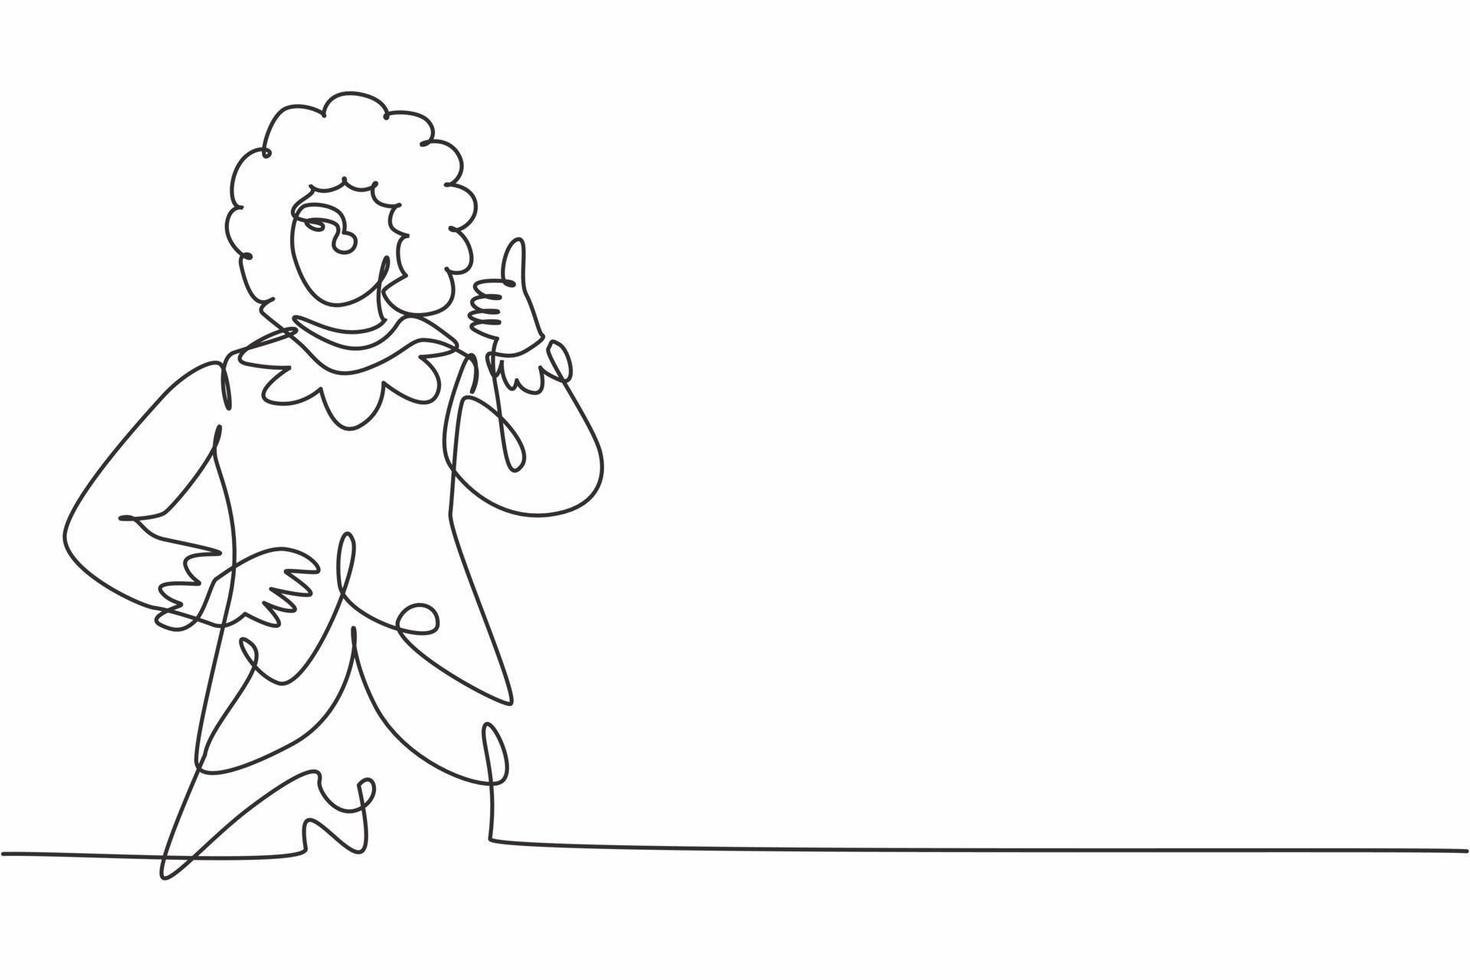 Continuous one line drawing female clown with thumbs-up gesture, wearing a wig and smiling face make-up, entertaining kids at a festive birthday. Single line draw design vector graphic illustration